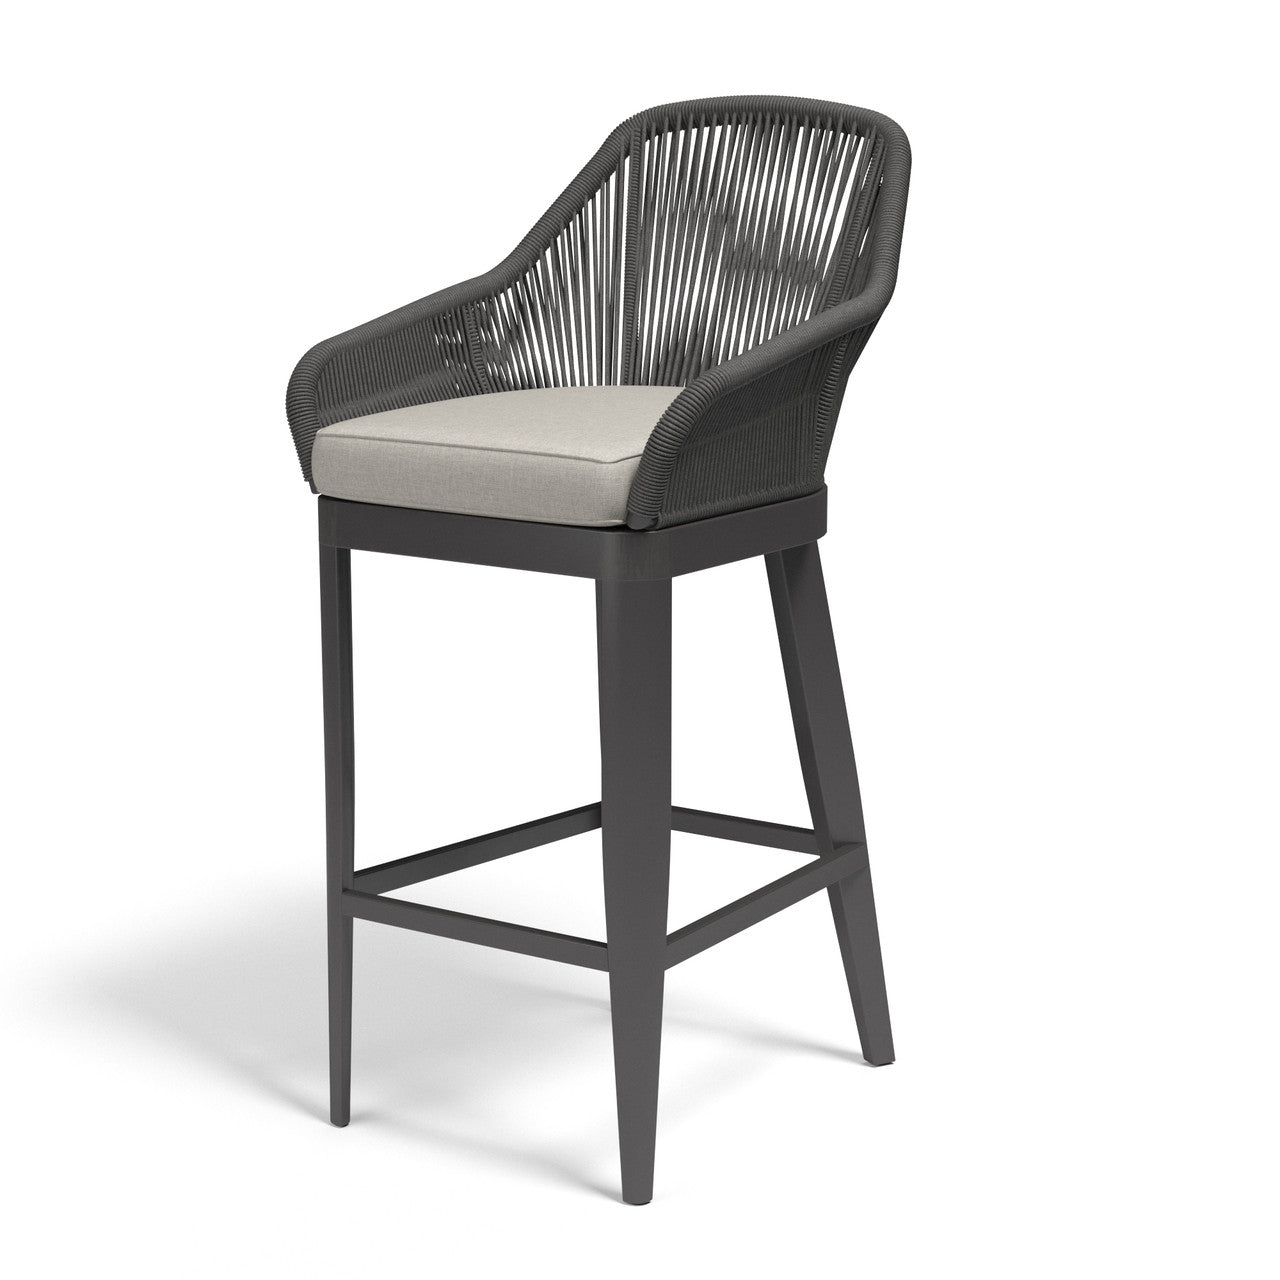 Sunset West Milano Barstool with cushions